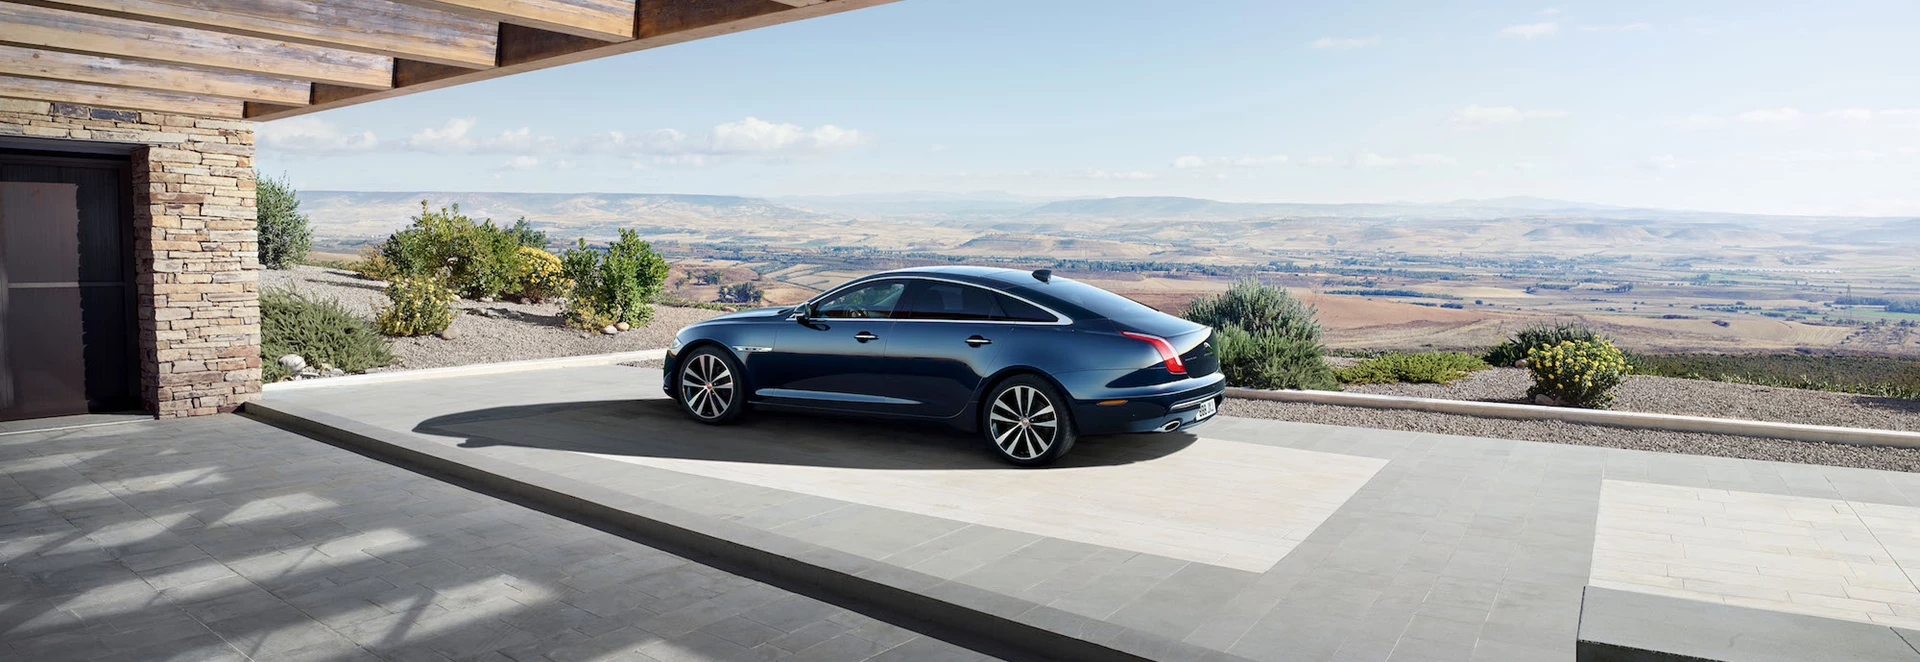 Buyer’s Guide to the Jaguar XJ 